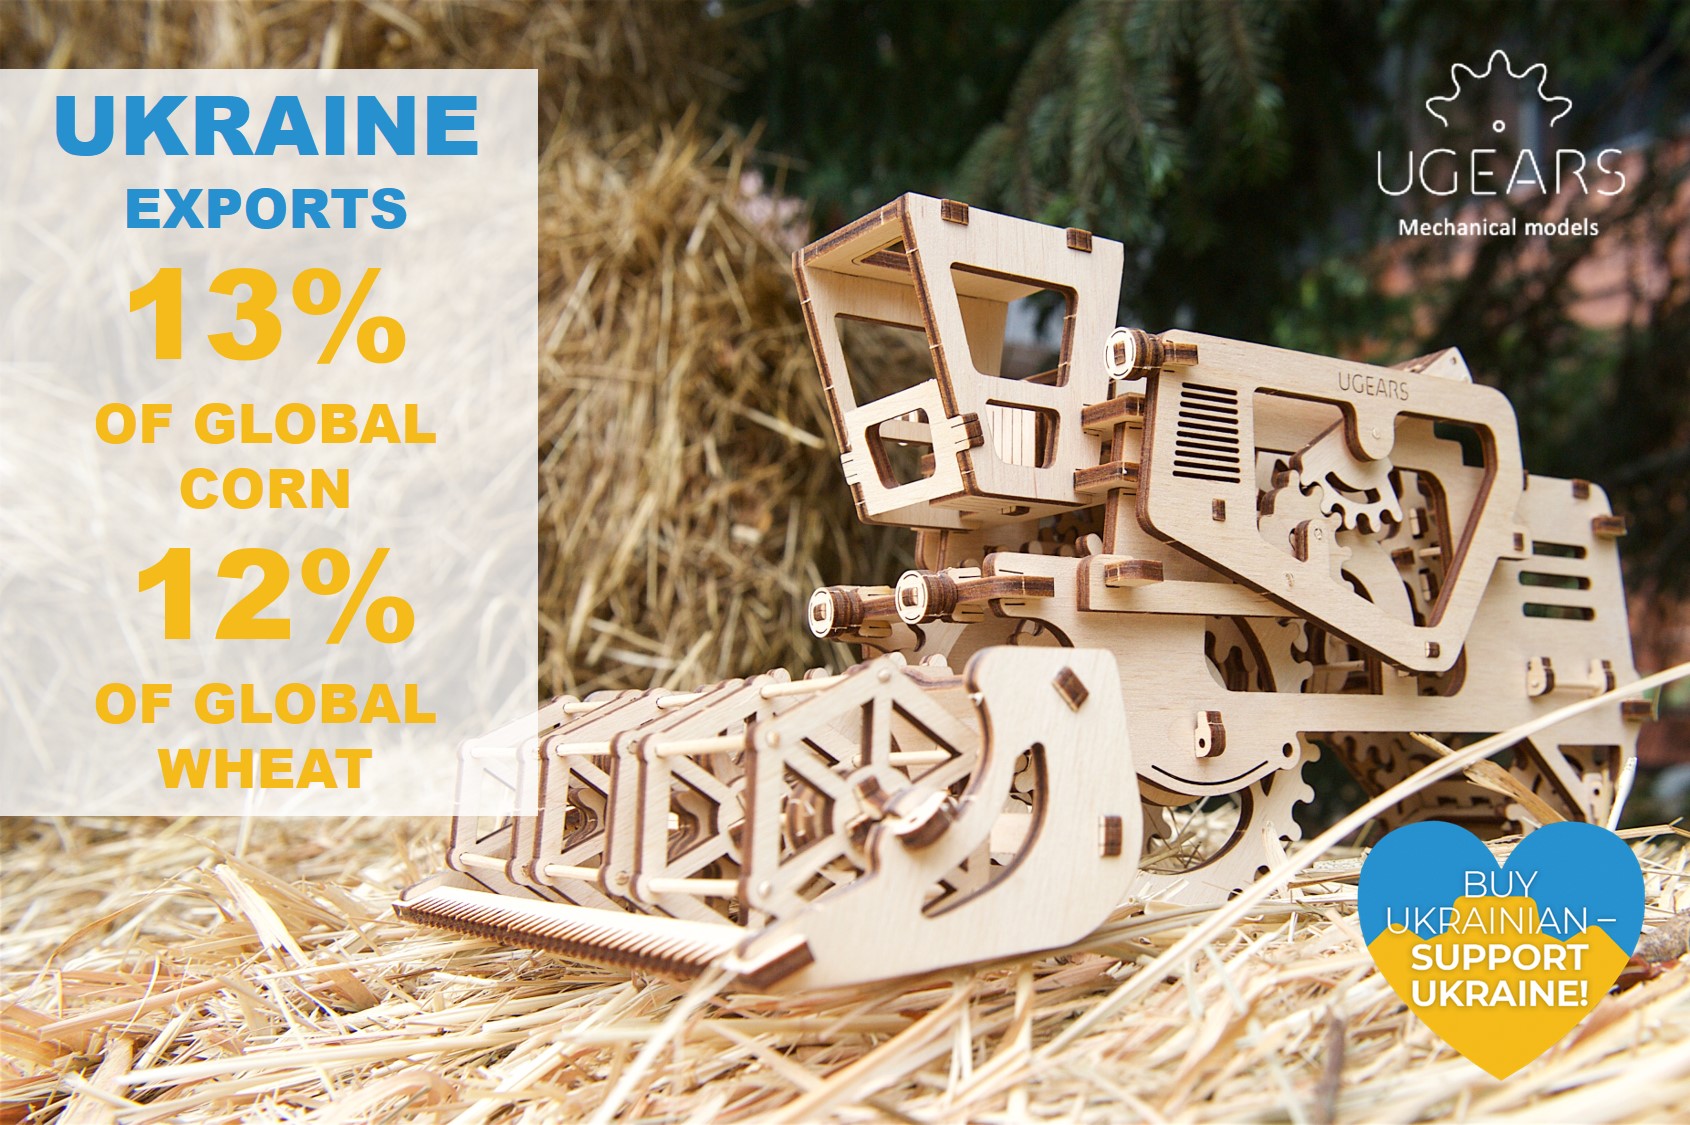 UGEARS on Twitter: "Ukraine is the world's breadbasket, exporting 13% of  global corn and 12% of global wheat. Celebrate Ukraine's role in feeding  the world by purchasing the Ugears Tractor or Combine